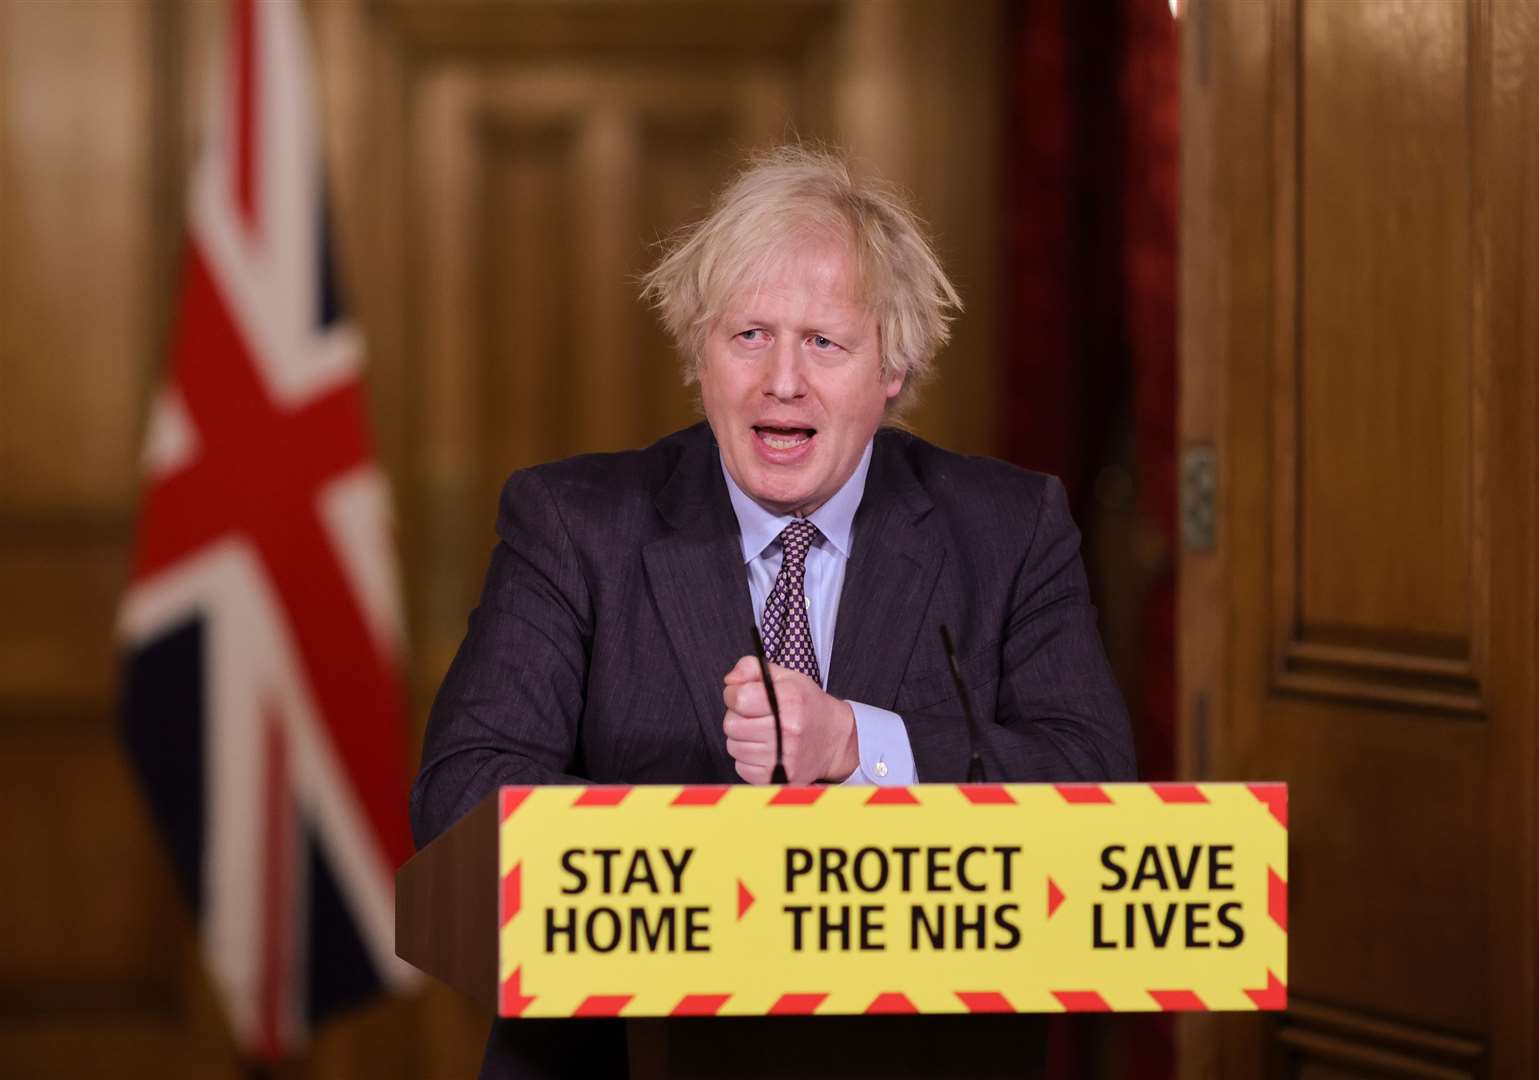 Prime Minister Boris Johnston has announced the rouetmap out of lockdown for England